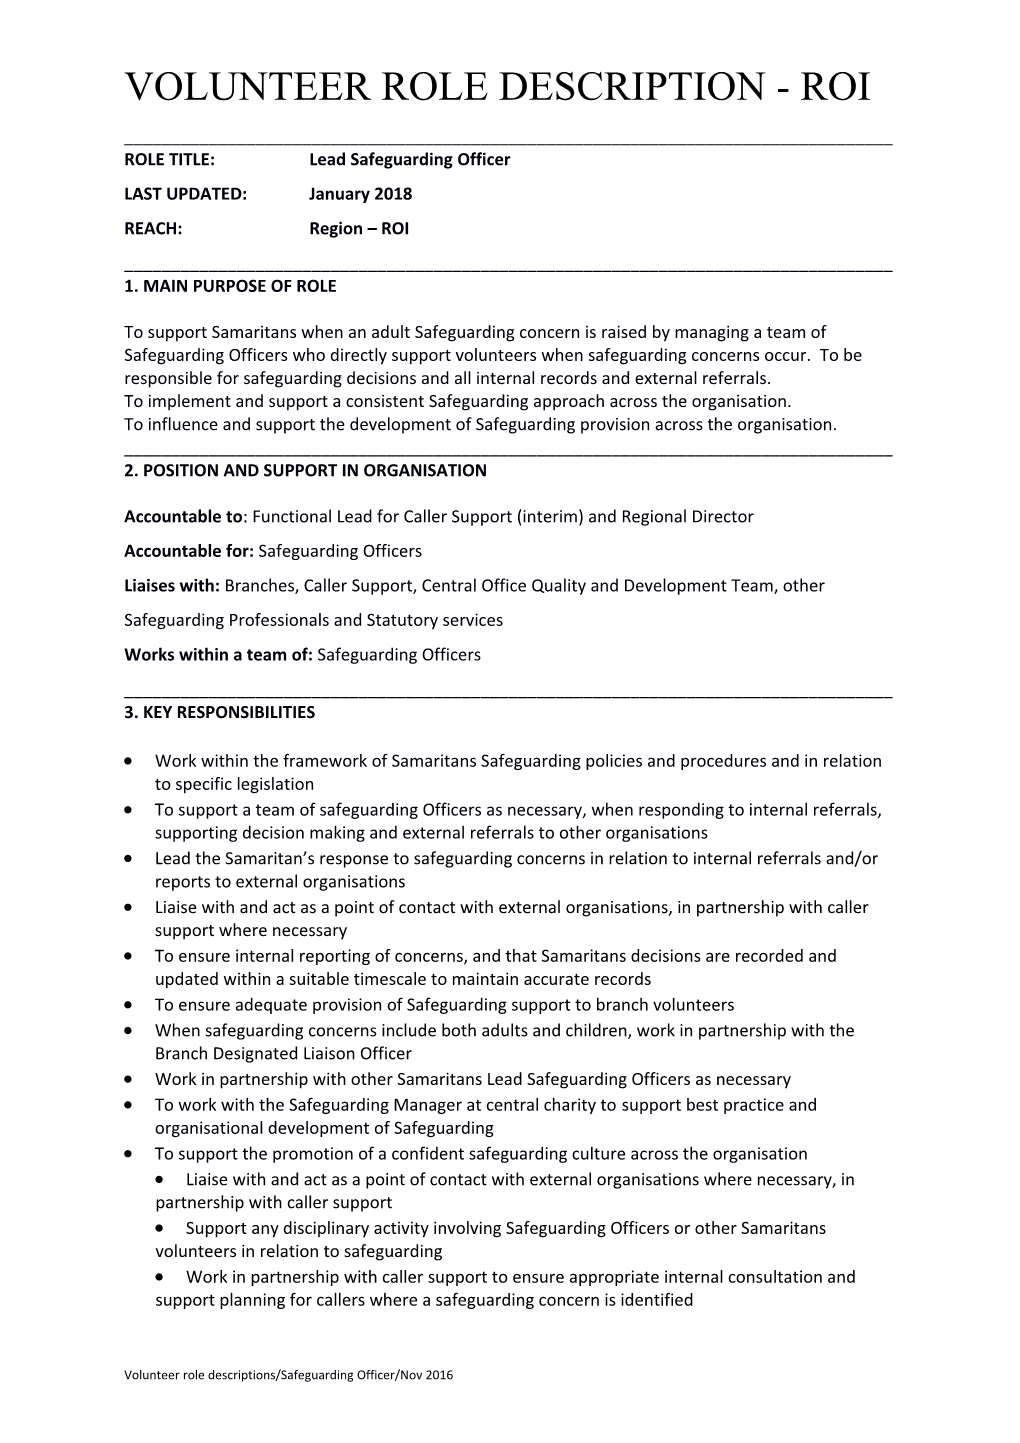 ROLE TITLE:Lead Safeguarding Officer